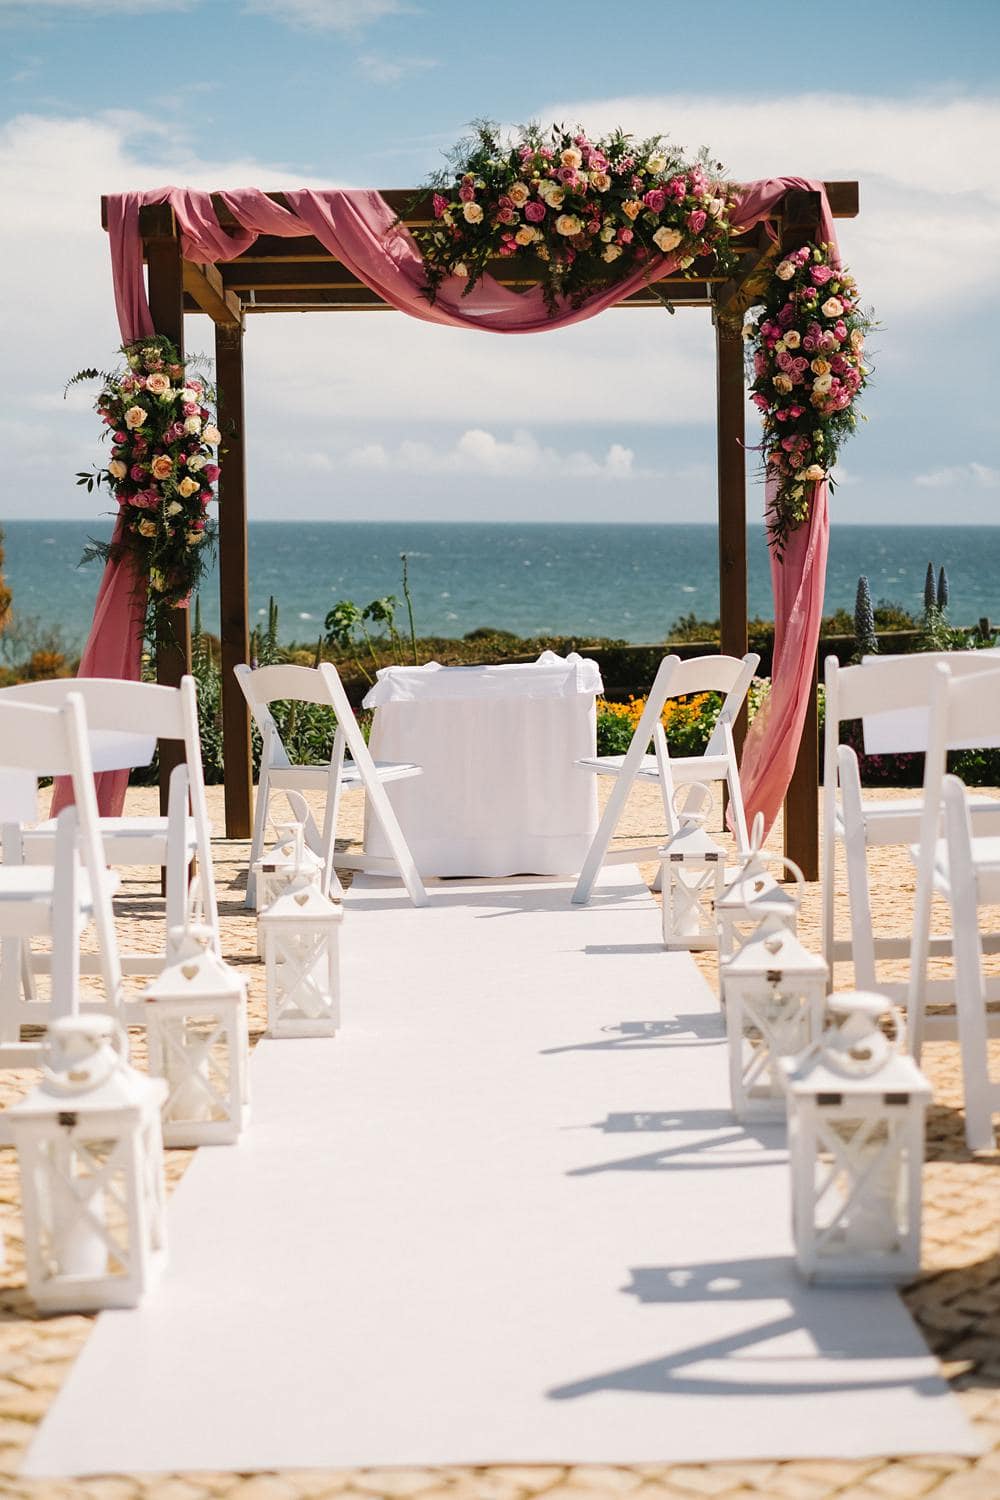 rustic wooden Floral Arch Viral Wedding Flowers pink yellow rose garden, ceremony backdrop, flower arc, garden wedding, pink wedding inspiration , blush wedding inspiration suites alba resort in Algarve by the sea www.jesuscaballero.com